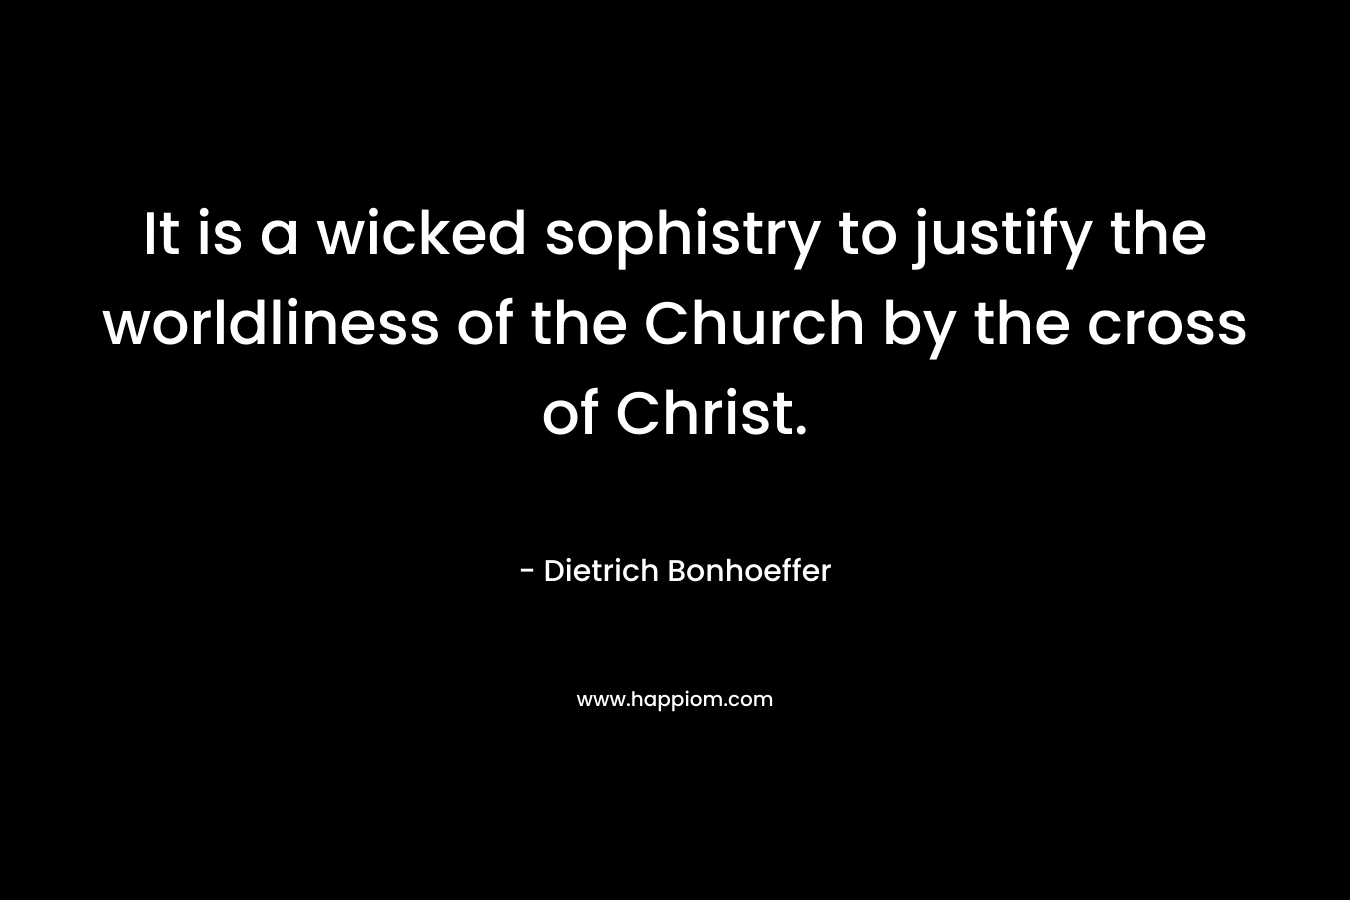 It is a wicked sophistry to justify the worldliness of the Church by the cross of Christ. – Dietrich Bonhoeffer